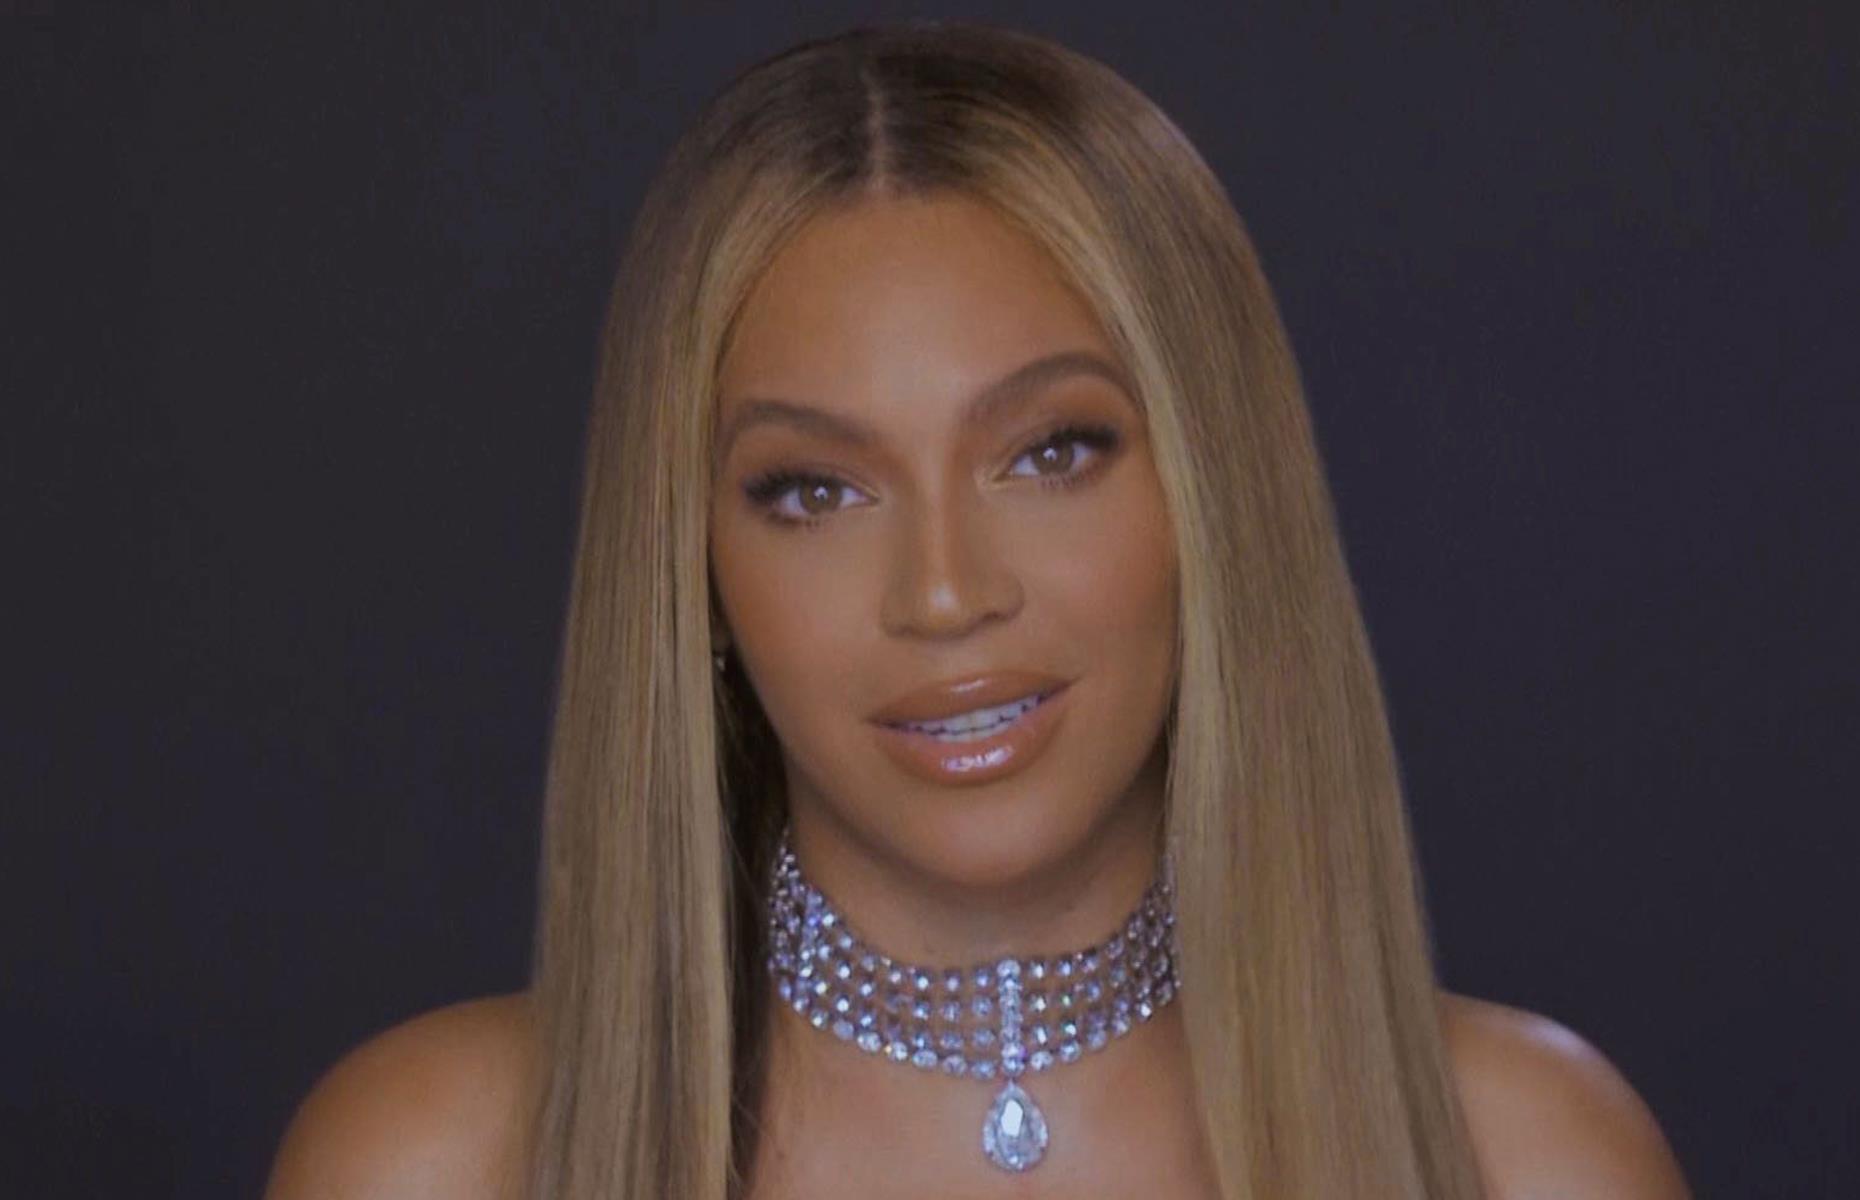 <p>Last year, the business-savvy starlet invested money in flavored water brand Lemon Perfect. The health-conscious company uses zero sugar and no artificial flavors or coloring in its products, which are packed full of Vitamin C.</p>  <p>"I don’t typically enjoy drinks without added sugar, but Lemon Perfect is delicious," Beyoncé said in a statement on the Lemon Perfect website. "It was an easy decision to invest in something that not only tastes great and is healthy but also, and most importantly, allows choosing a healthier lifestyle to be affordable and accessible to everyone."</p>